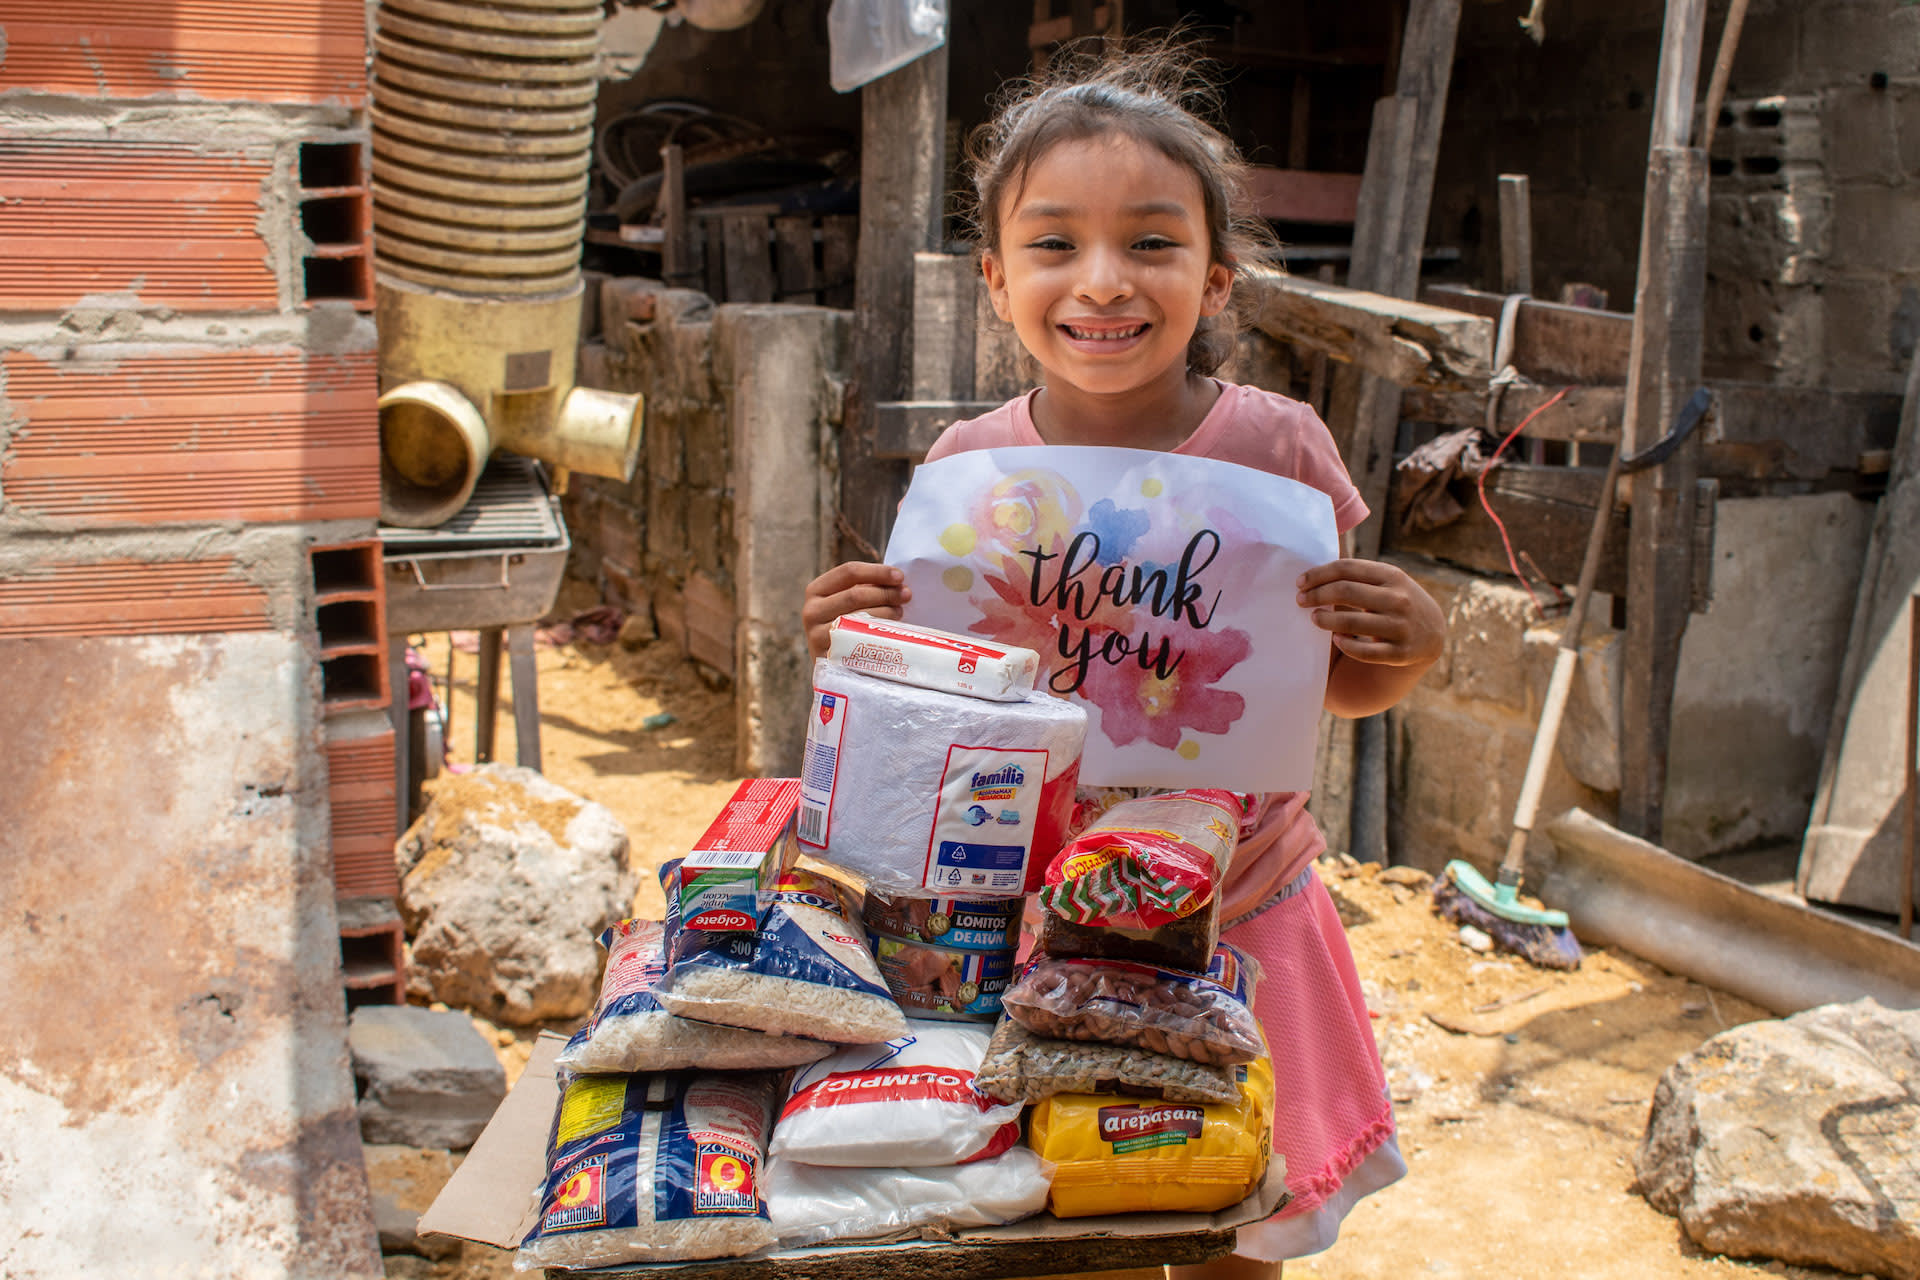 In Colombia, a girl holds a sign that says "Thank You", standing beside a grocery delivery from Compassion.